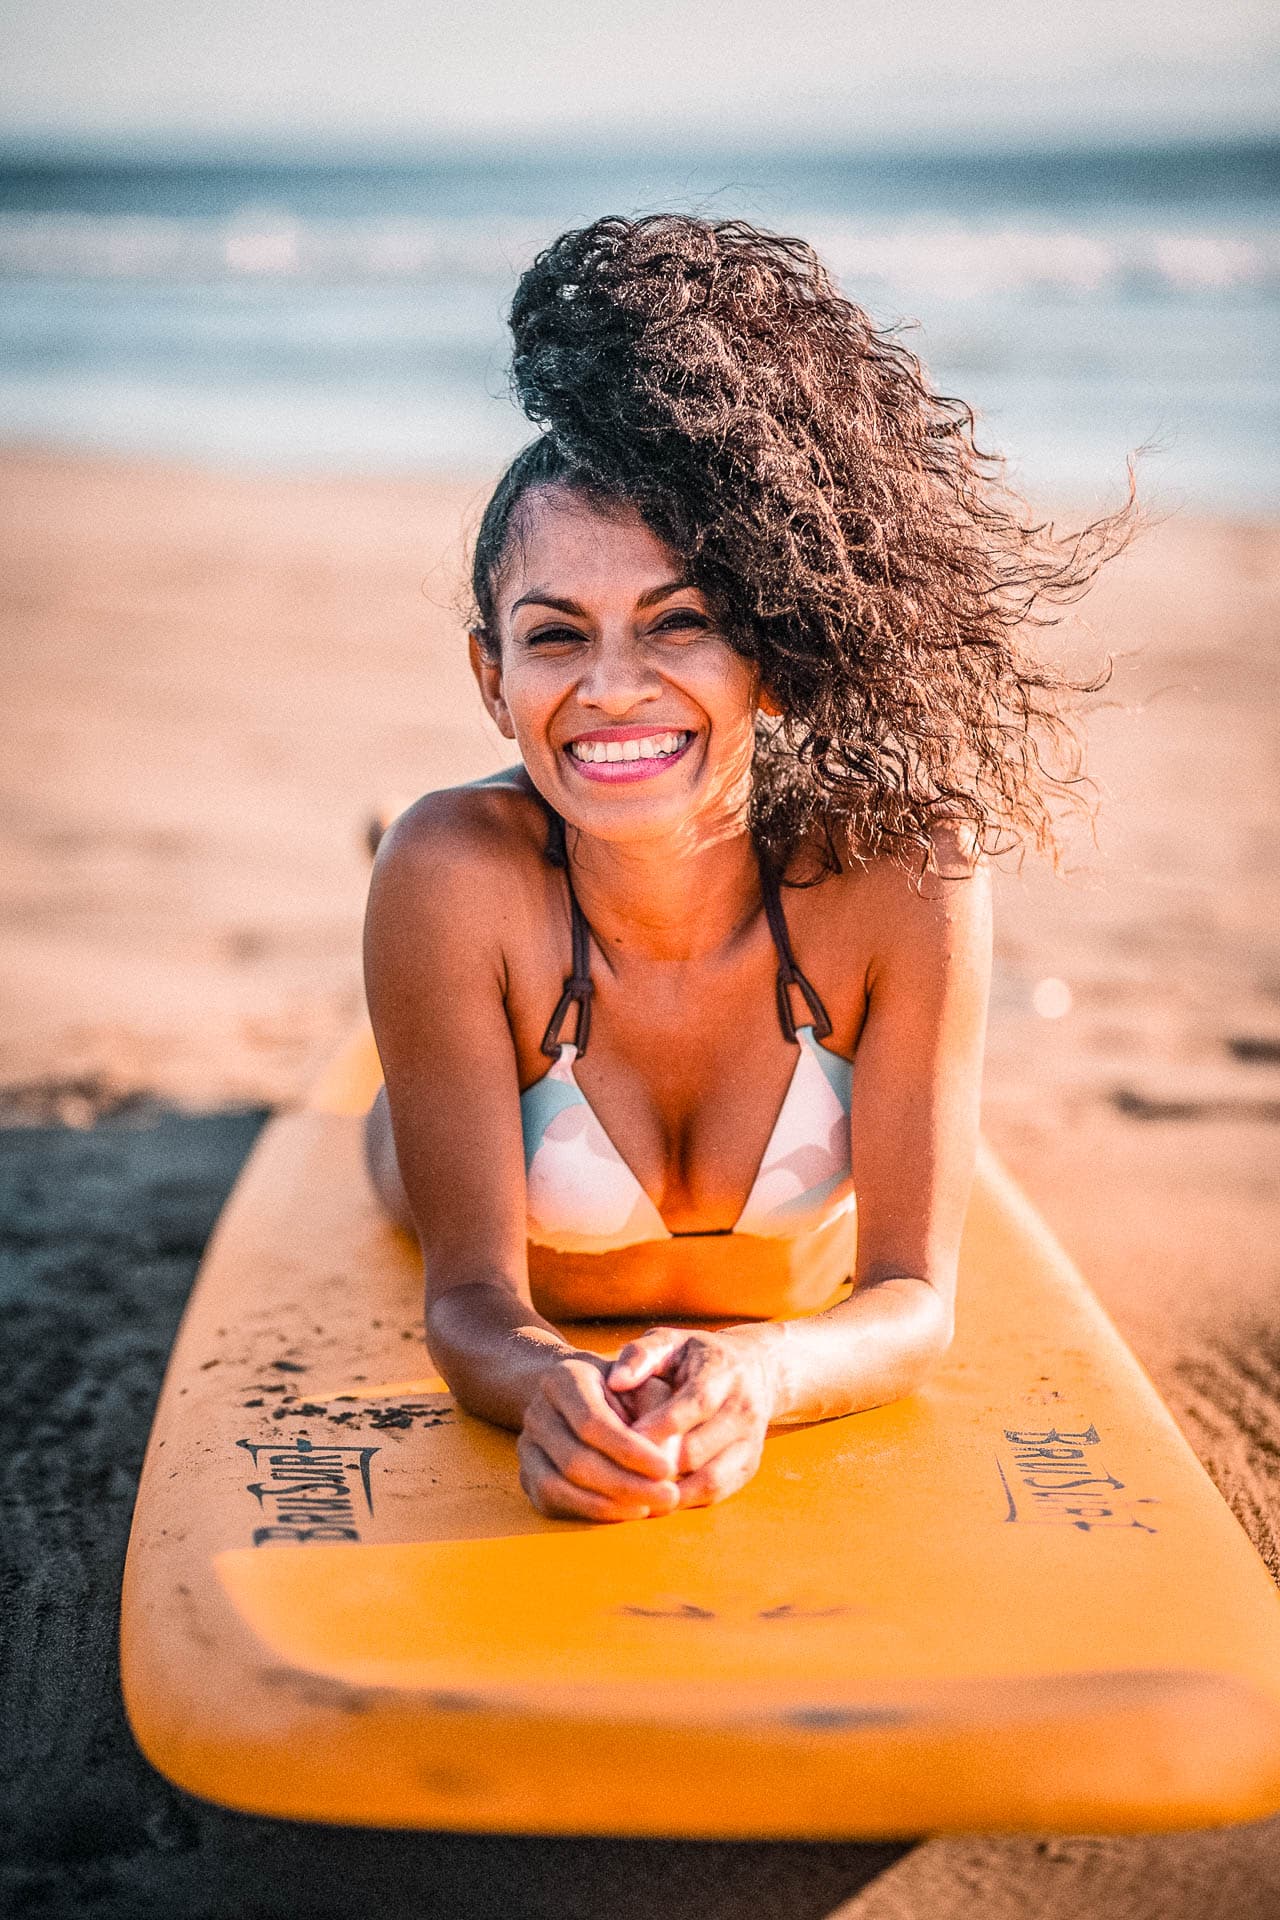 A person with curly long hair tied in a pony posing on a yellow surfboard